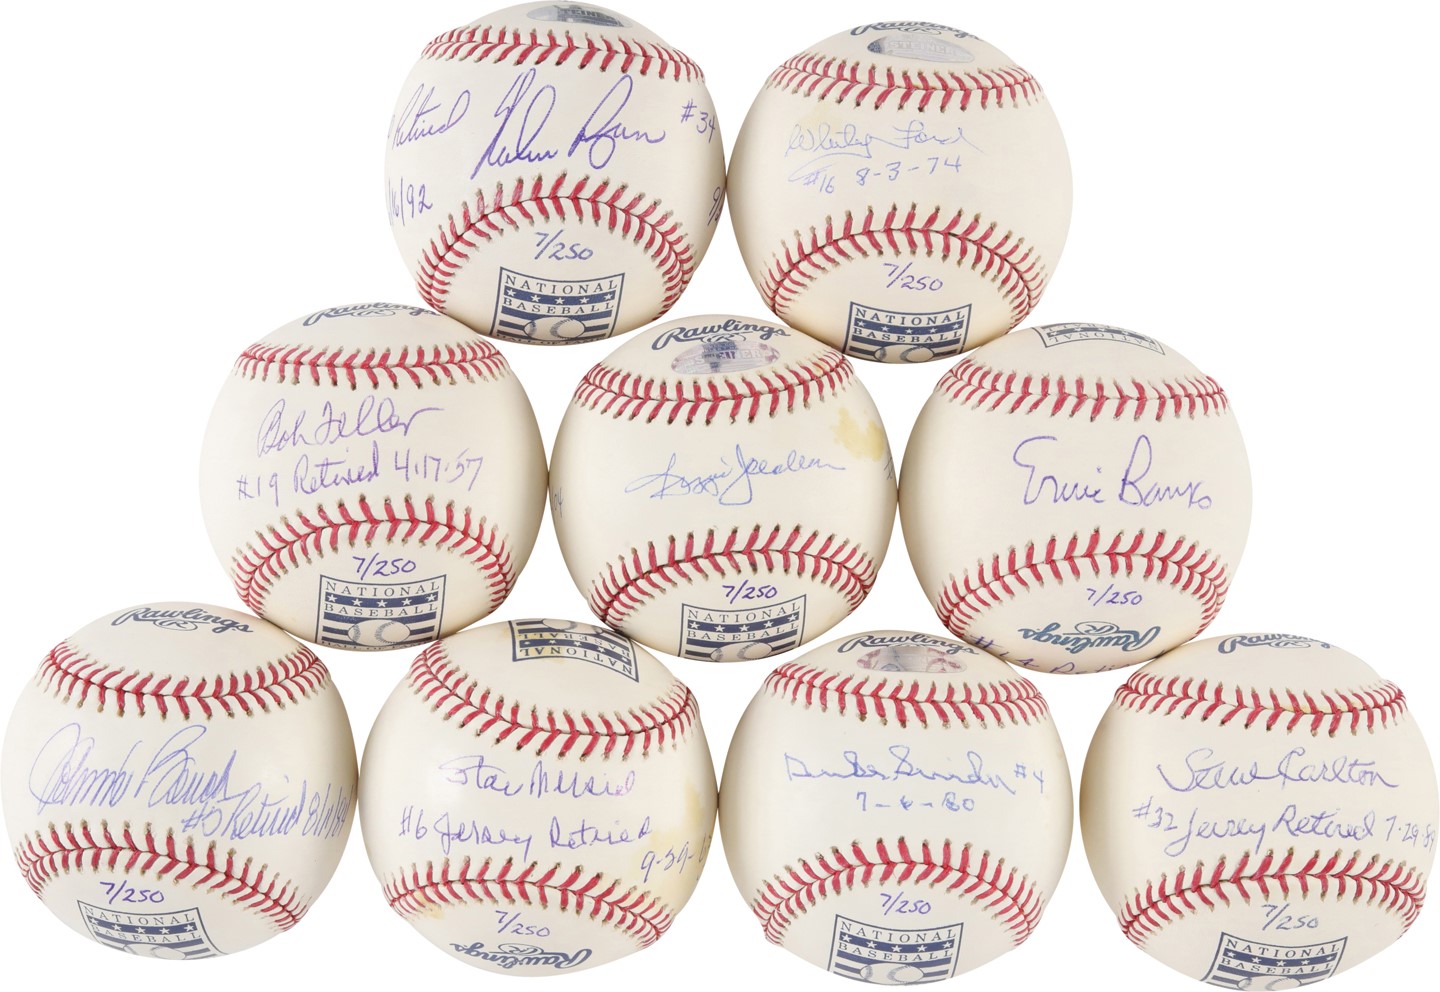 Baseball Autographs - Beautiful Hall of Famer Signed Inscribed Retired Jersey Number Baseball Collection - Each LE 7/250 (15)